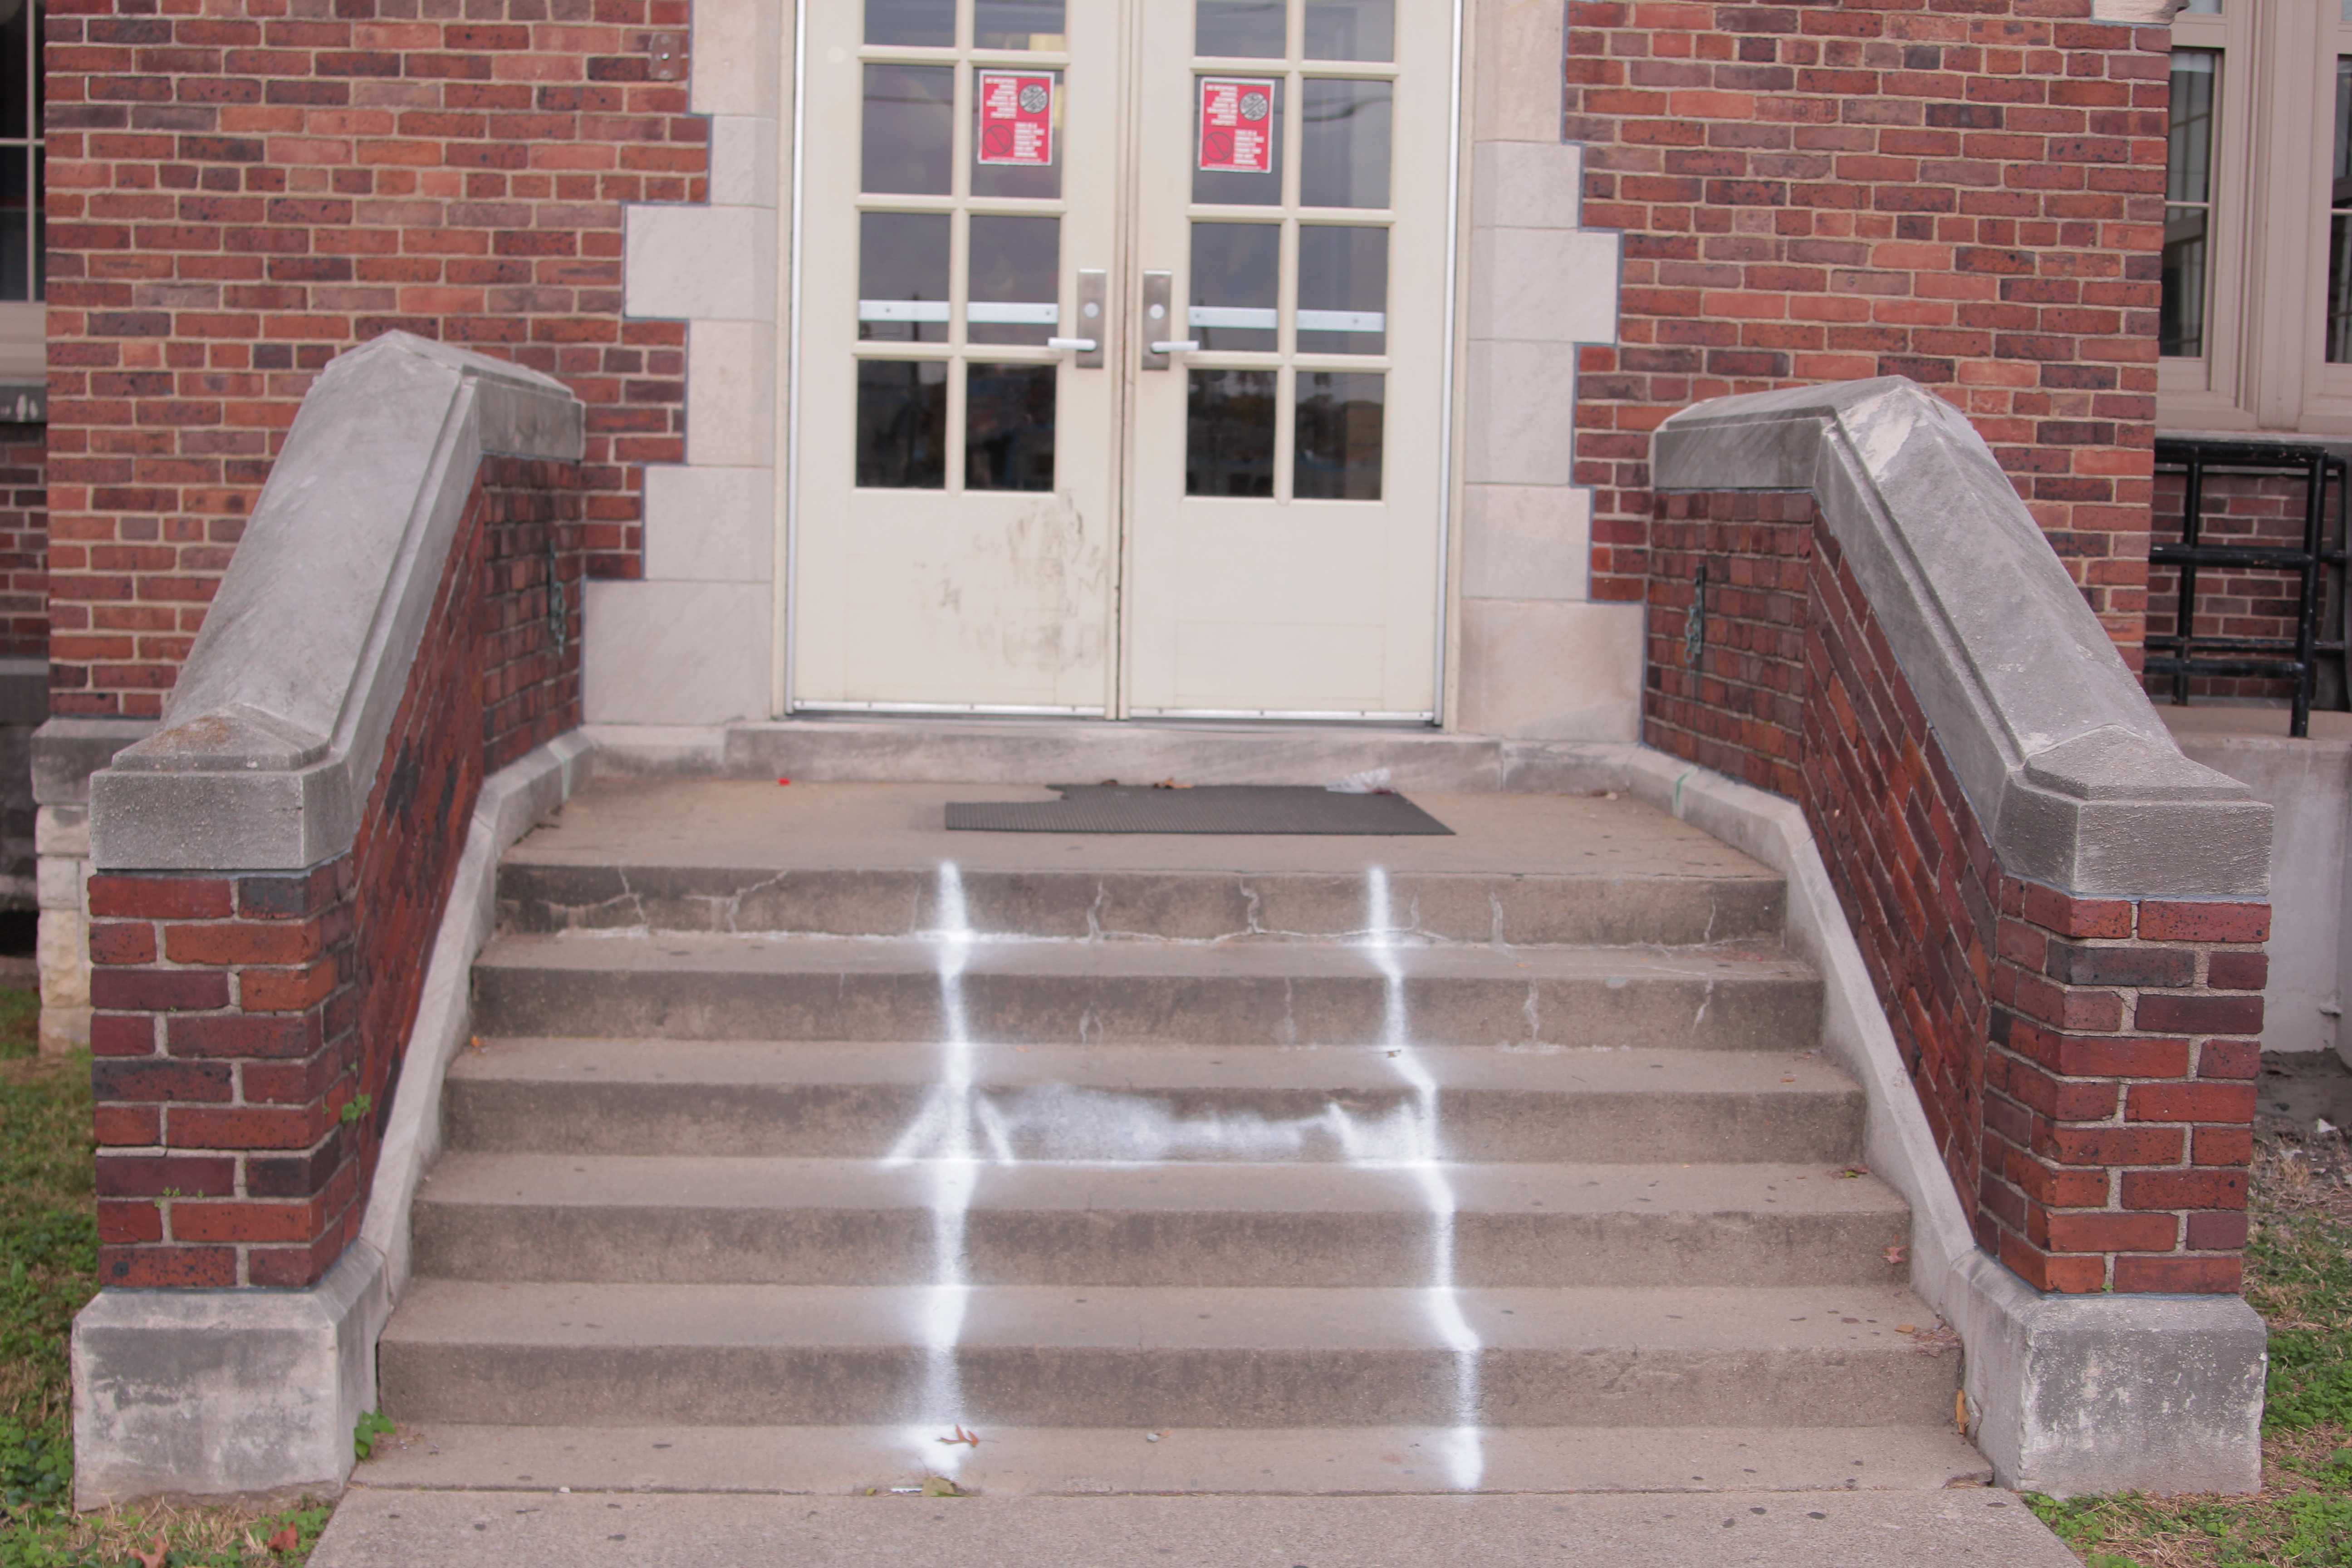 Today, after first block, Mr. Ed Burton (Security) saw a spray-painted H on the side steps of Manual. This was another vandalism prank suspected of Male students or affiliates. Photo by Tara Steiden